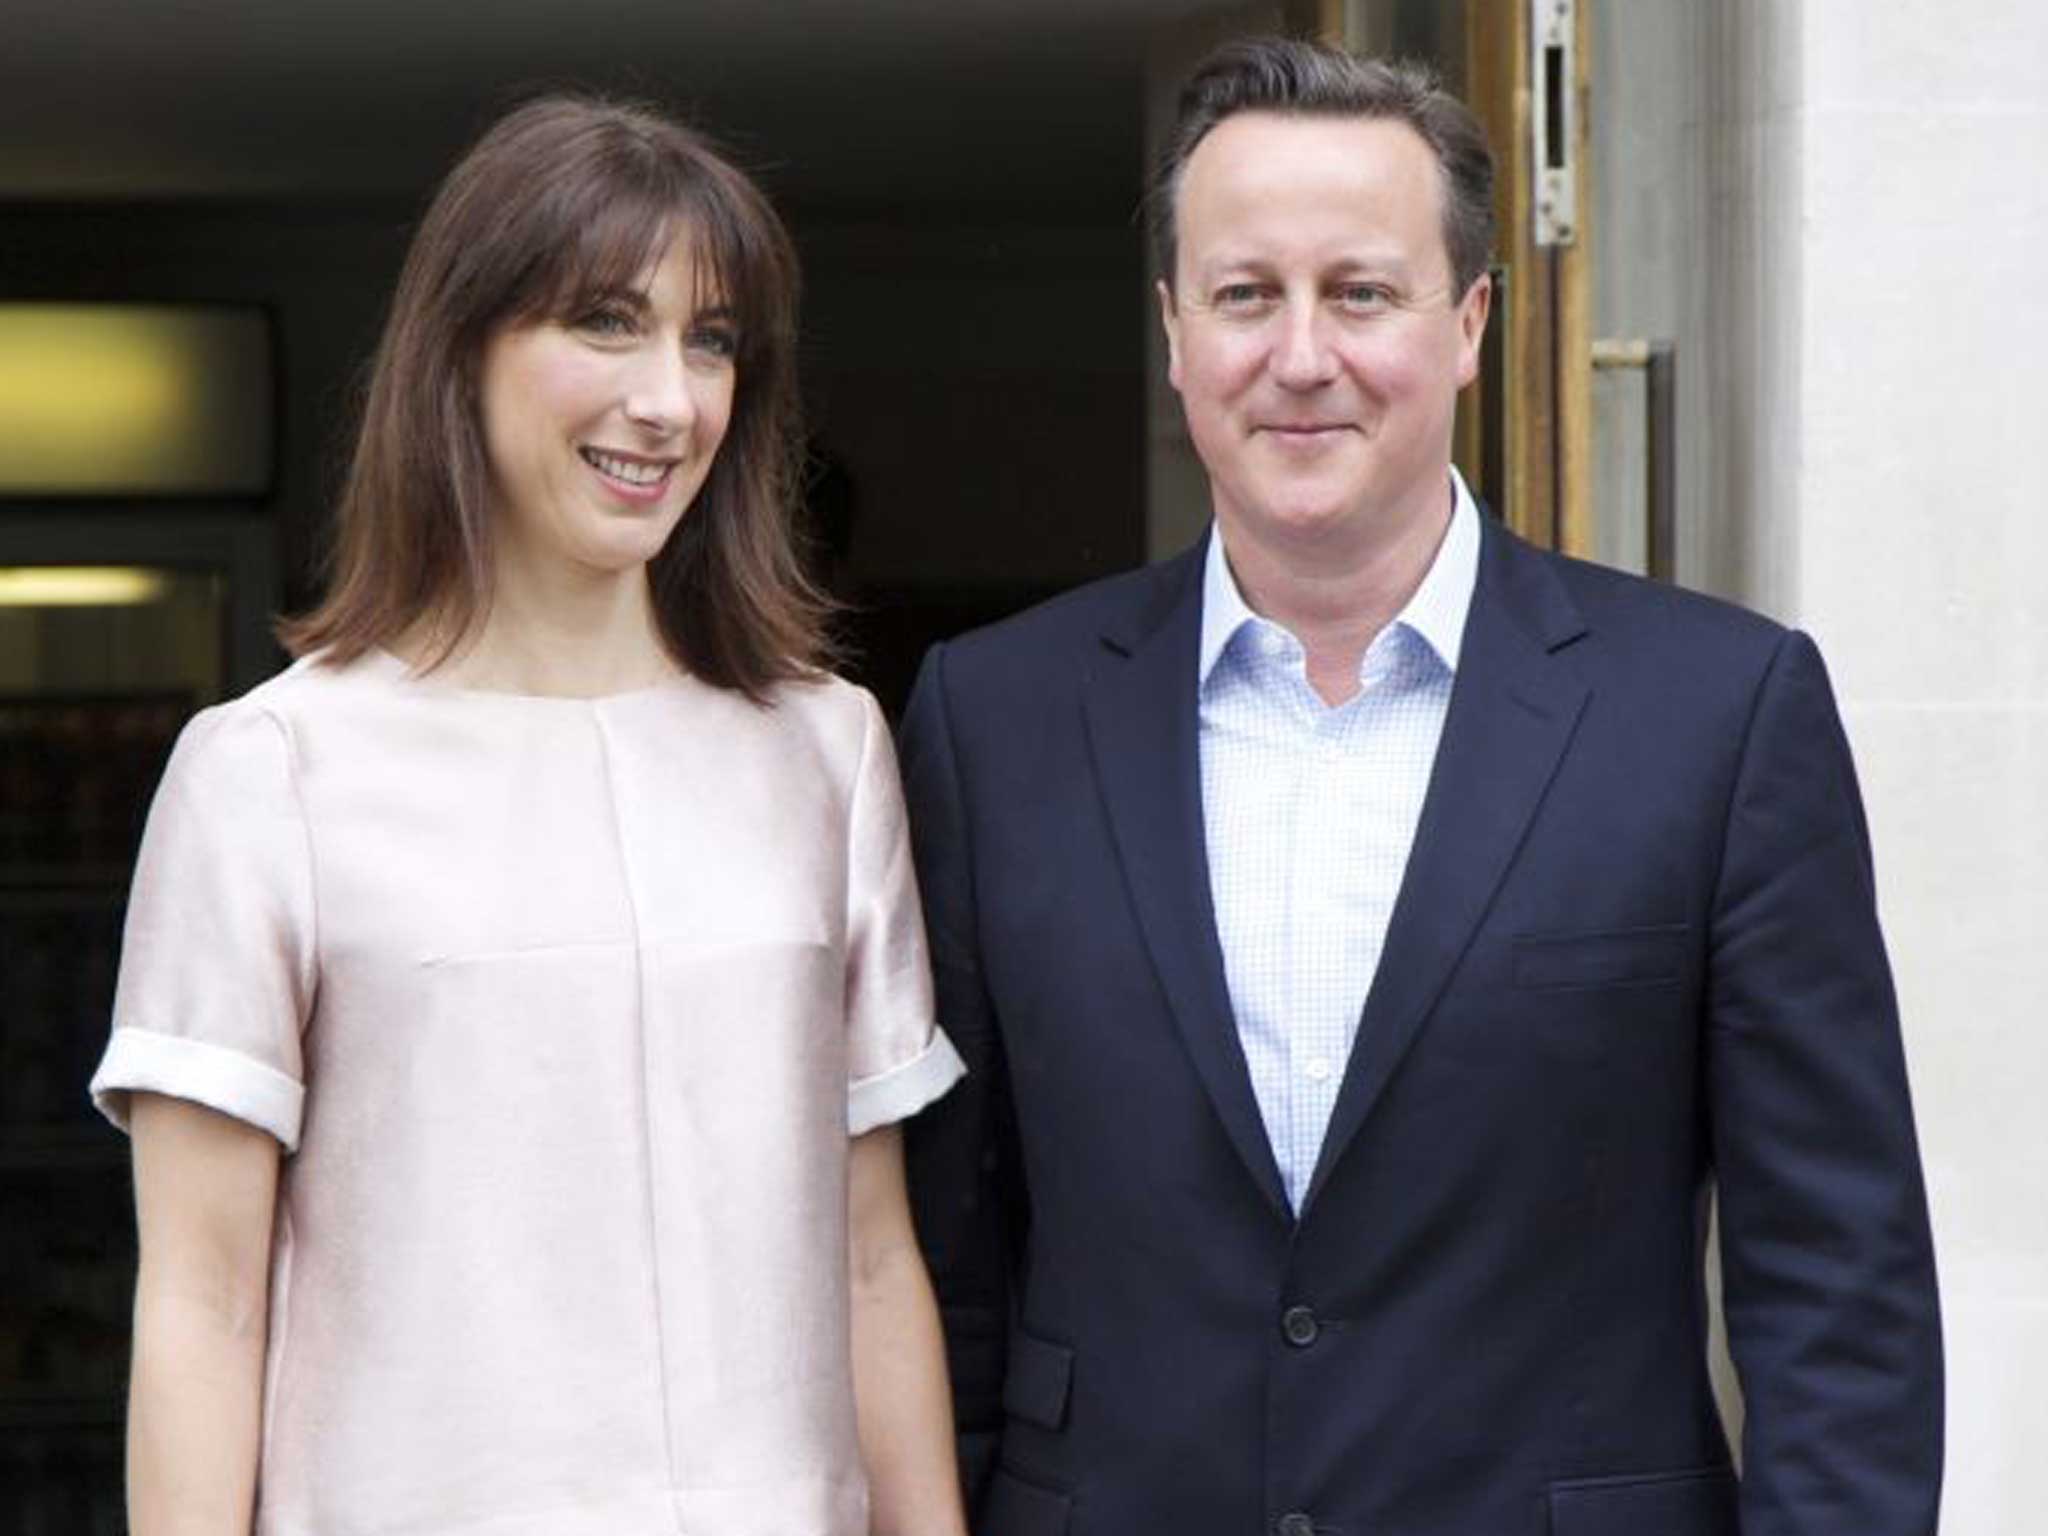 David and Samantha Cameron were said to 'get on very well' with the unnamed nanny, whose pictures have raised security concerns around Downing Street